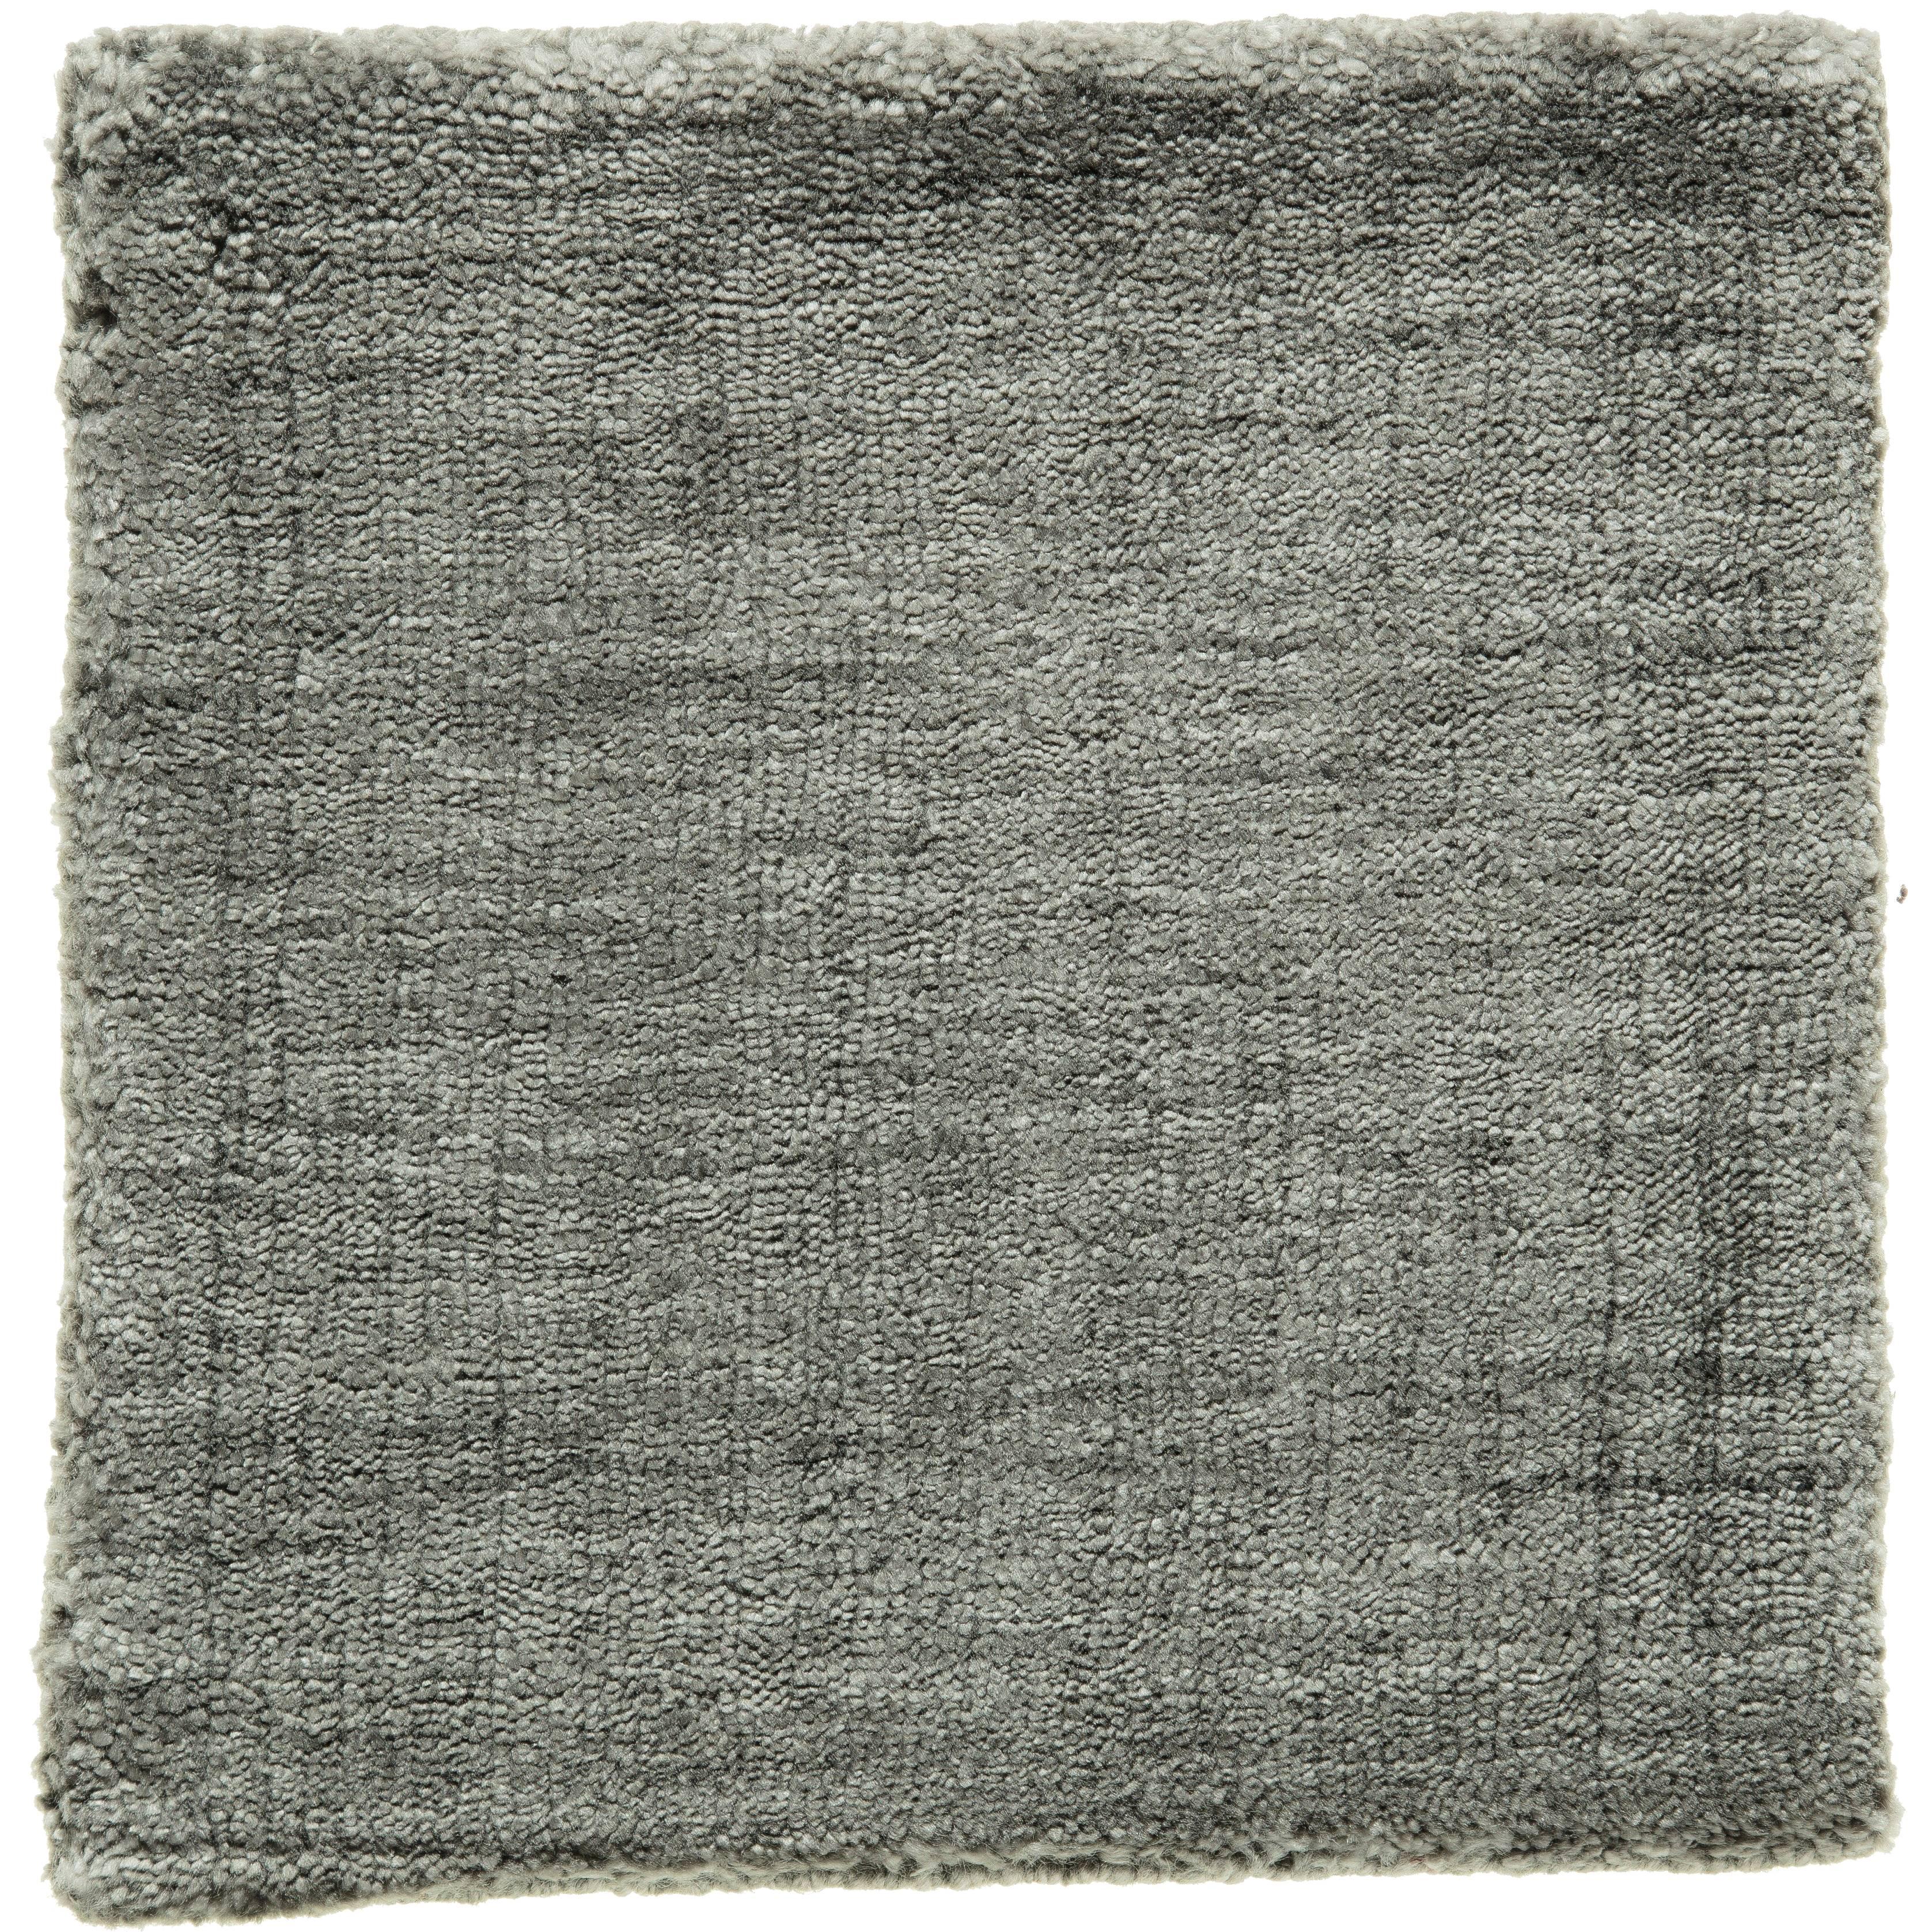 Neutral Grey Rug Hand-Loomed Bamboo Silk Solid Neutral Rug in Any Custom Size